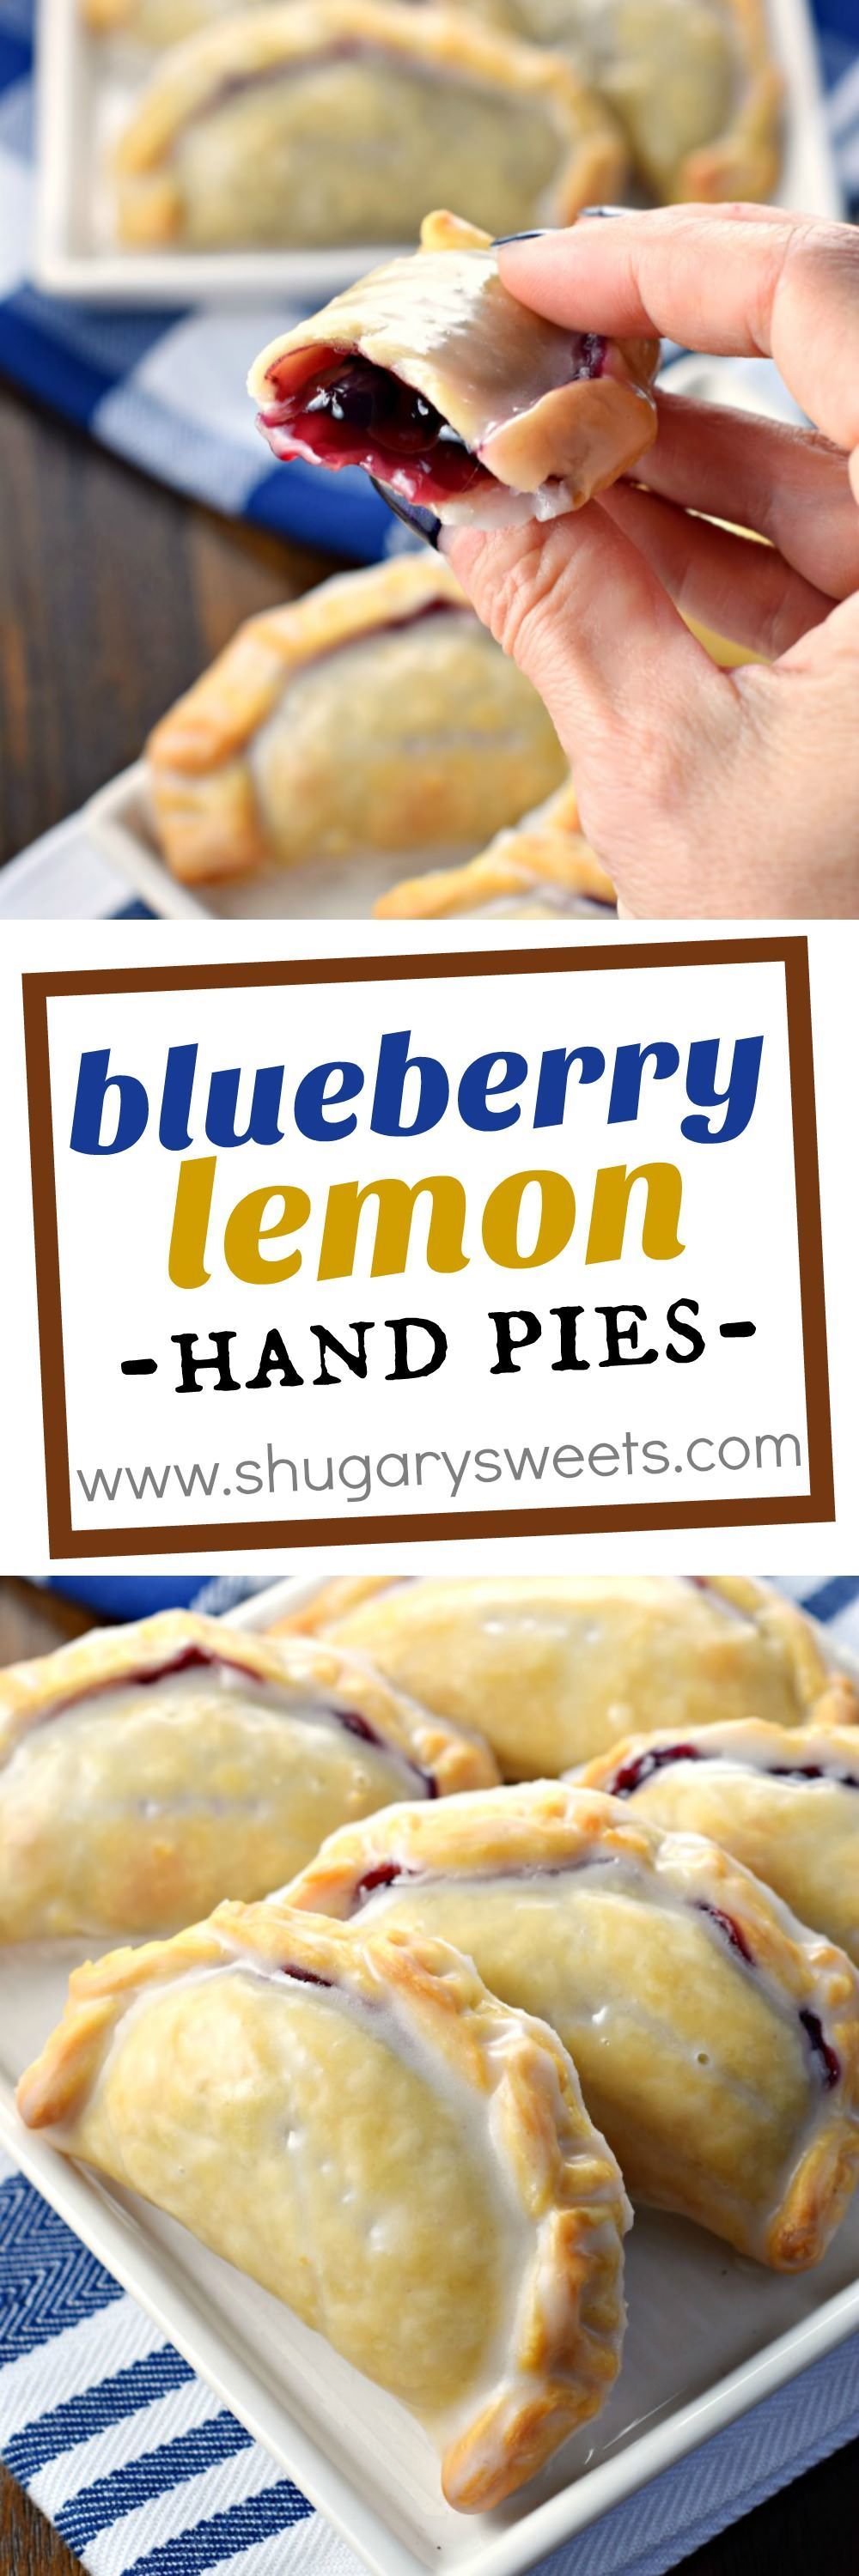 All it takes is 30 minutes to prepare these Blueberry Lemon Hand Pies with their f